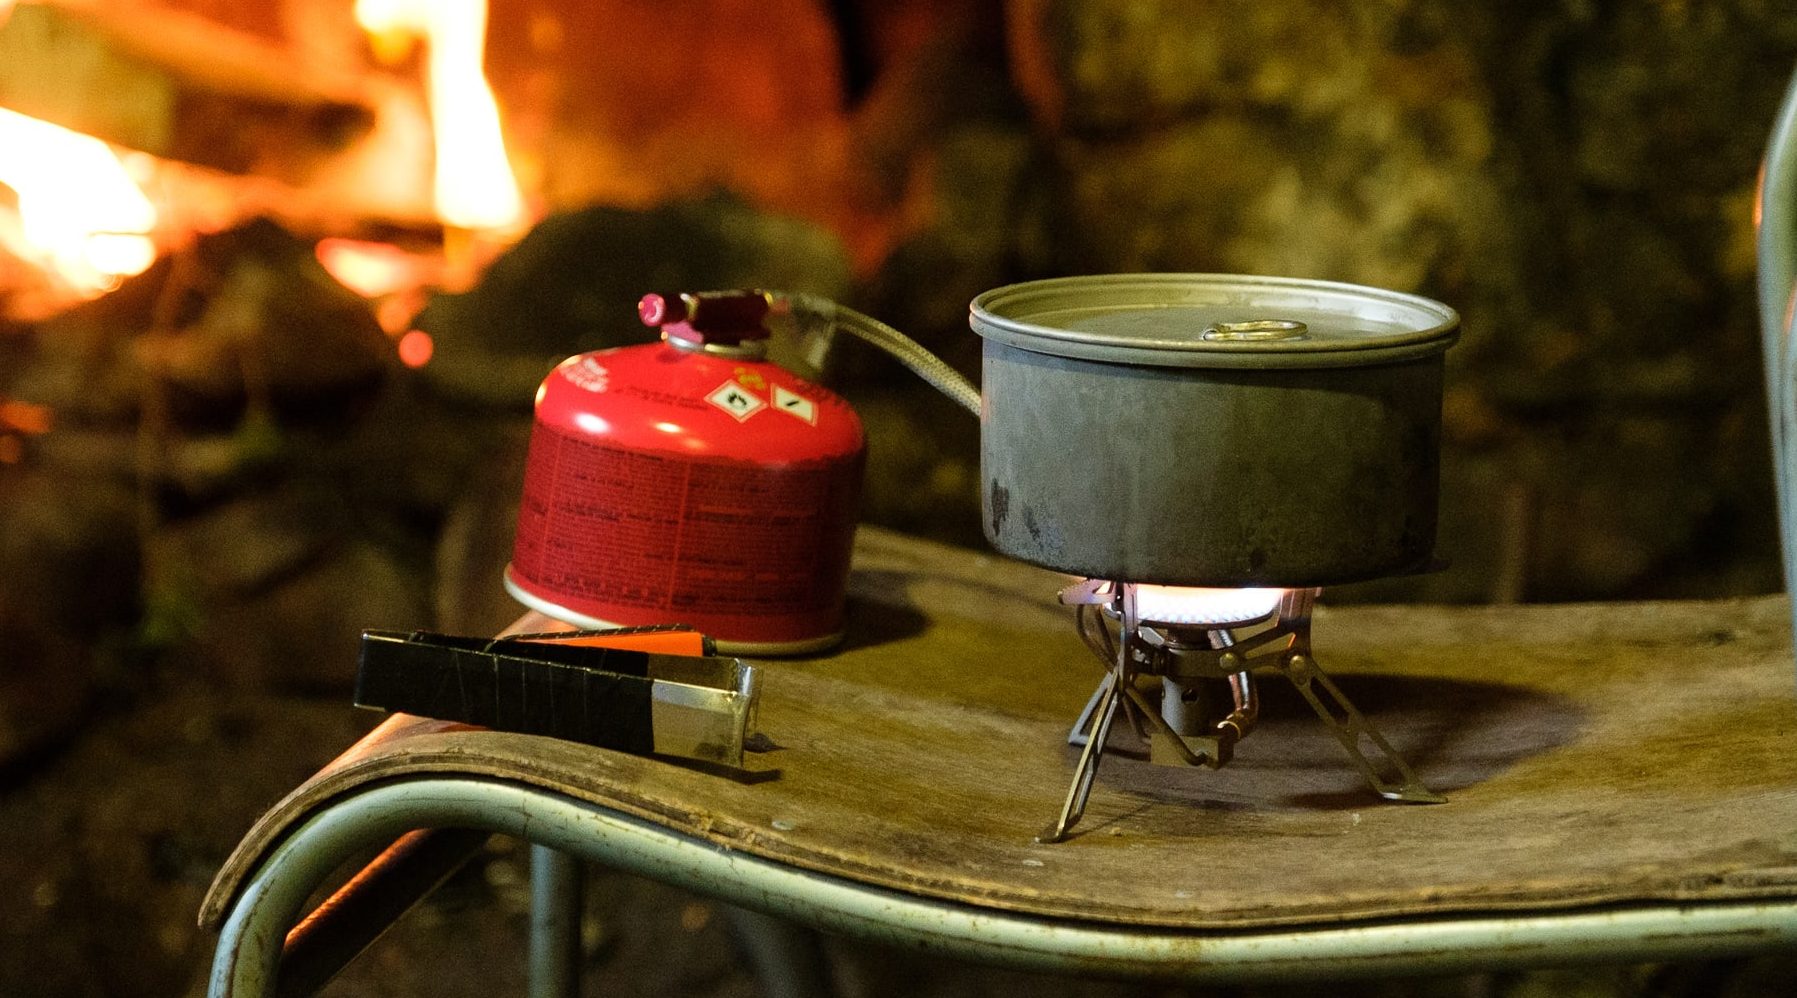 It's nearly impossible to get rid of a camp stove fuel canister in